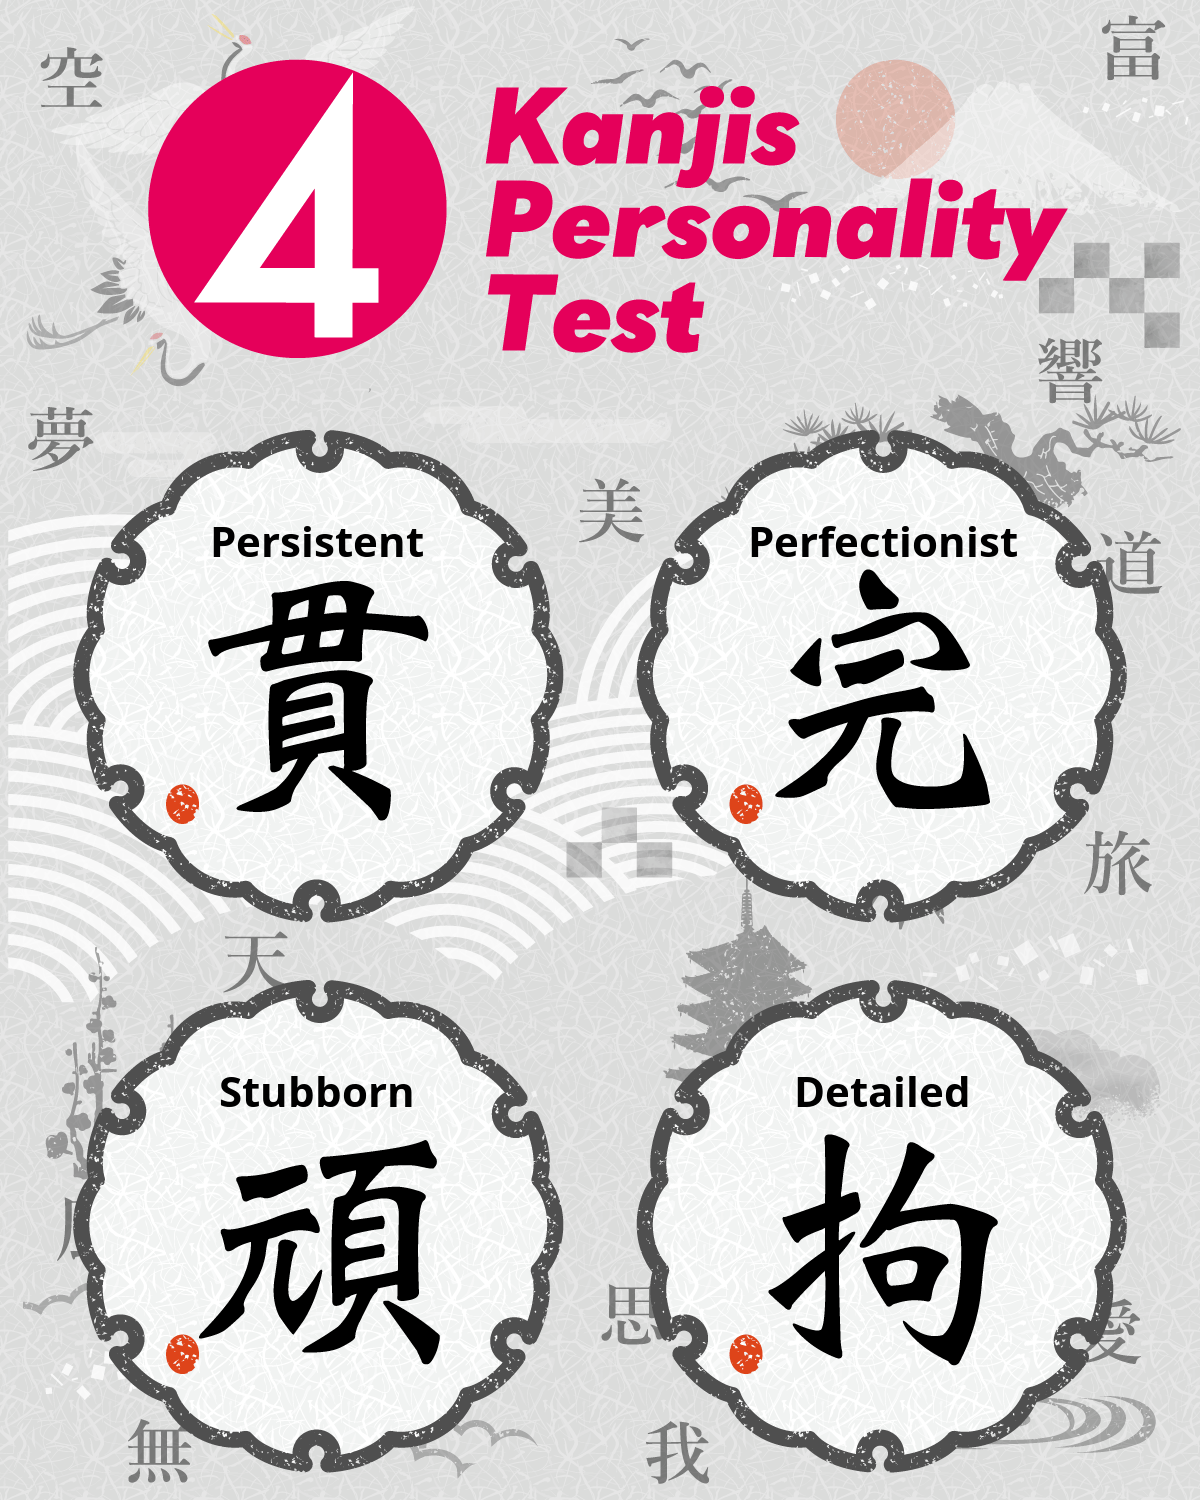 4 Kanjis Personality Test | What four Kanji characters describe your personality?